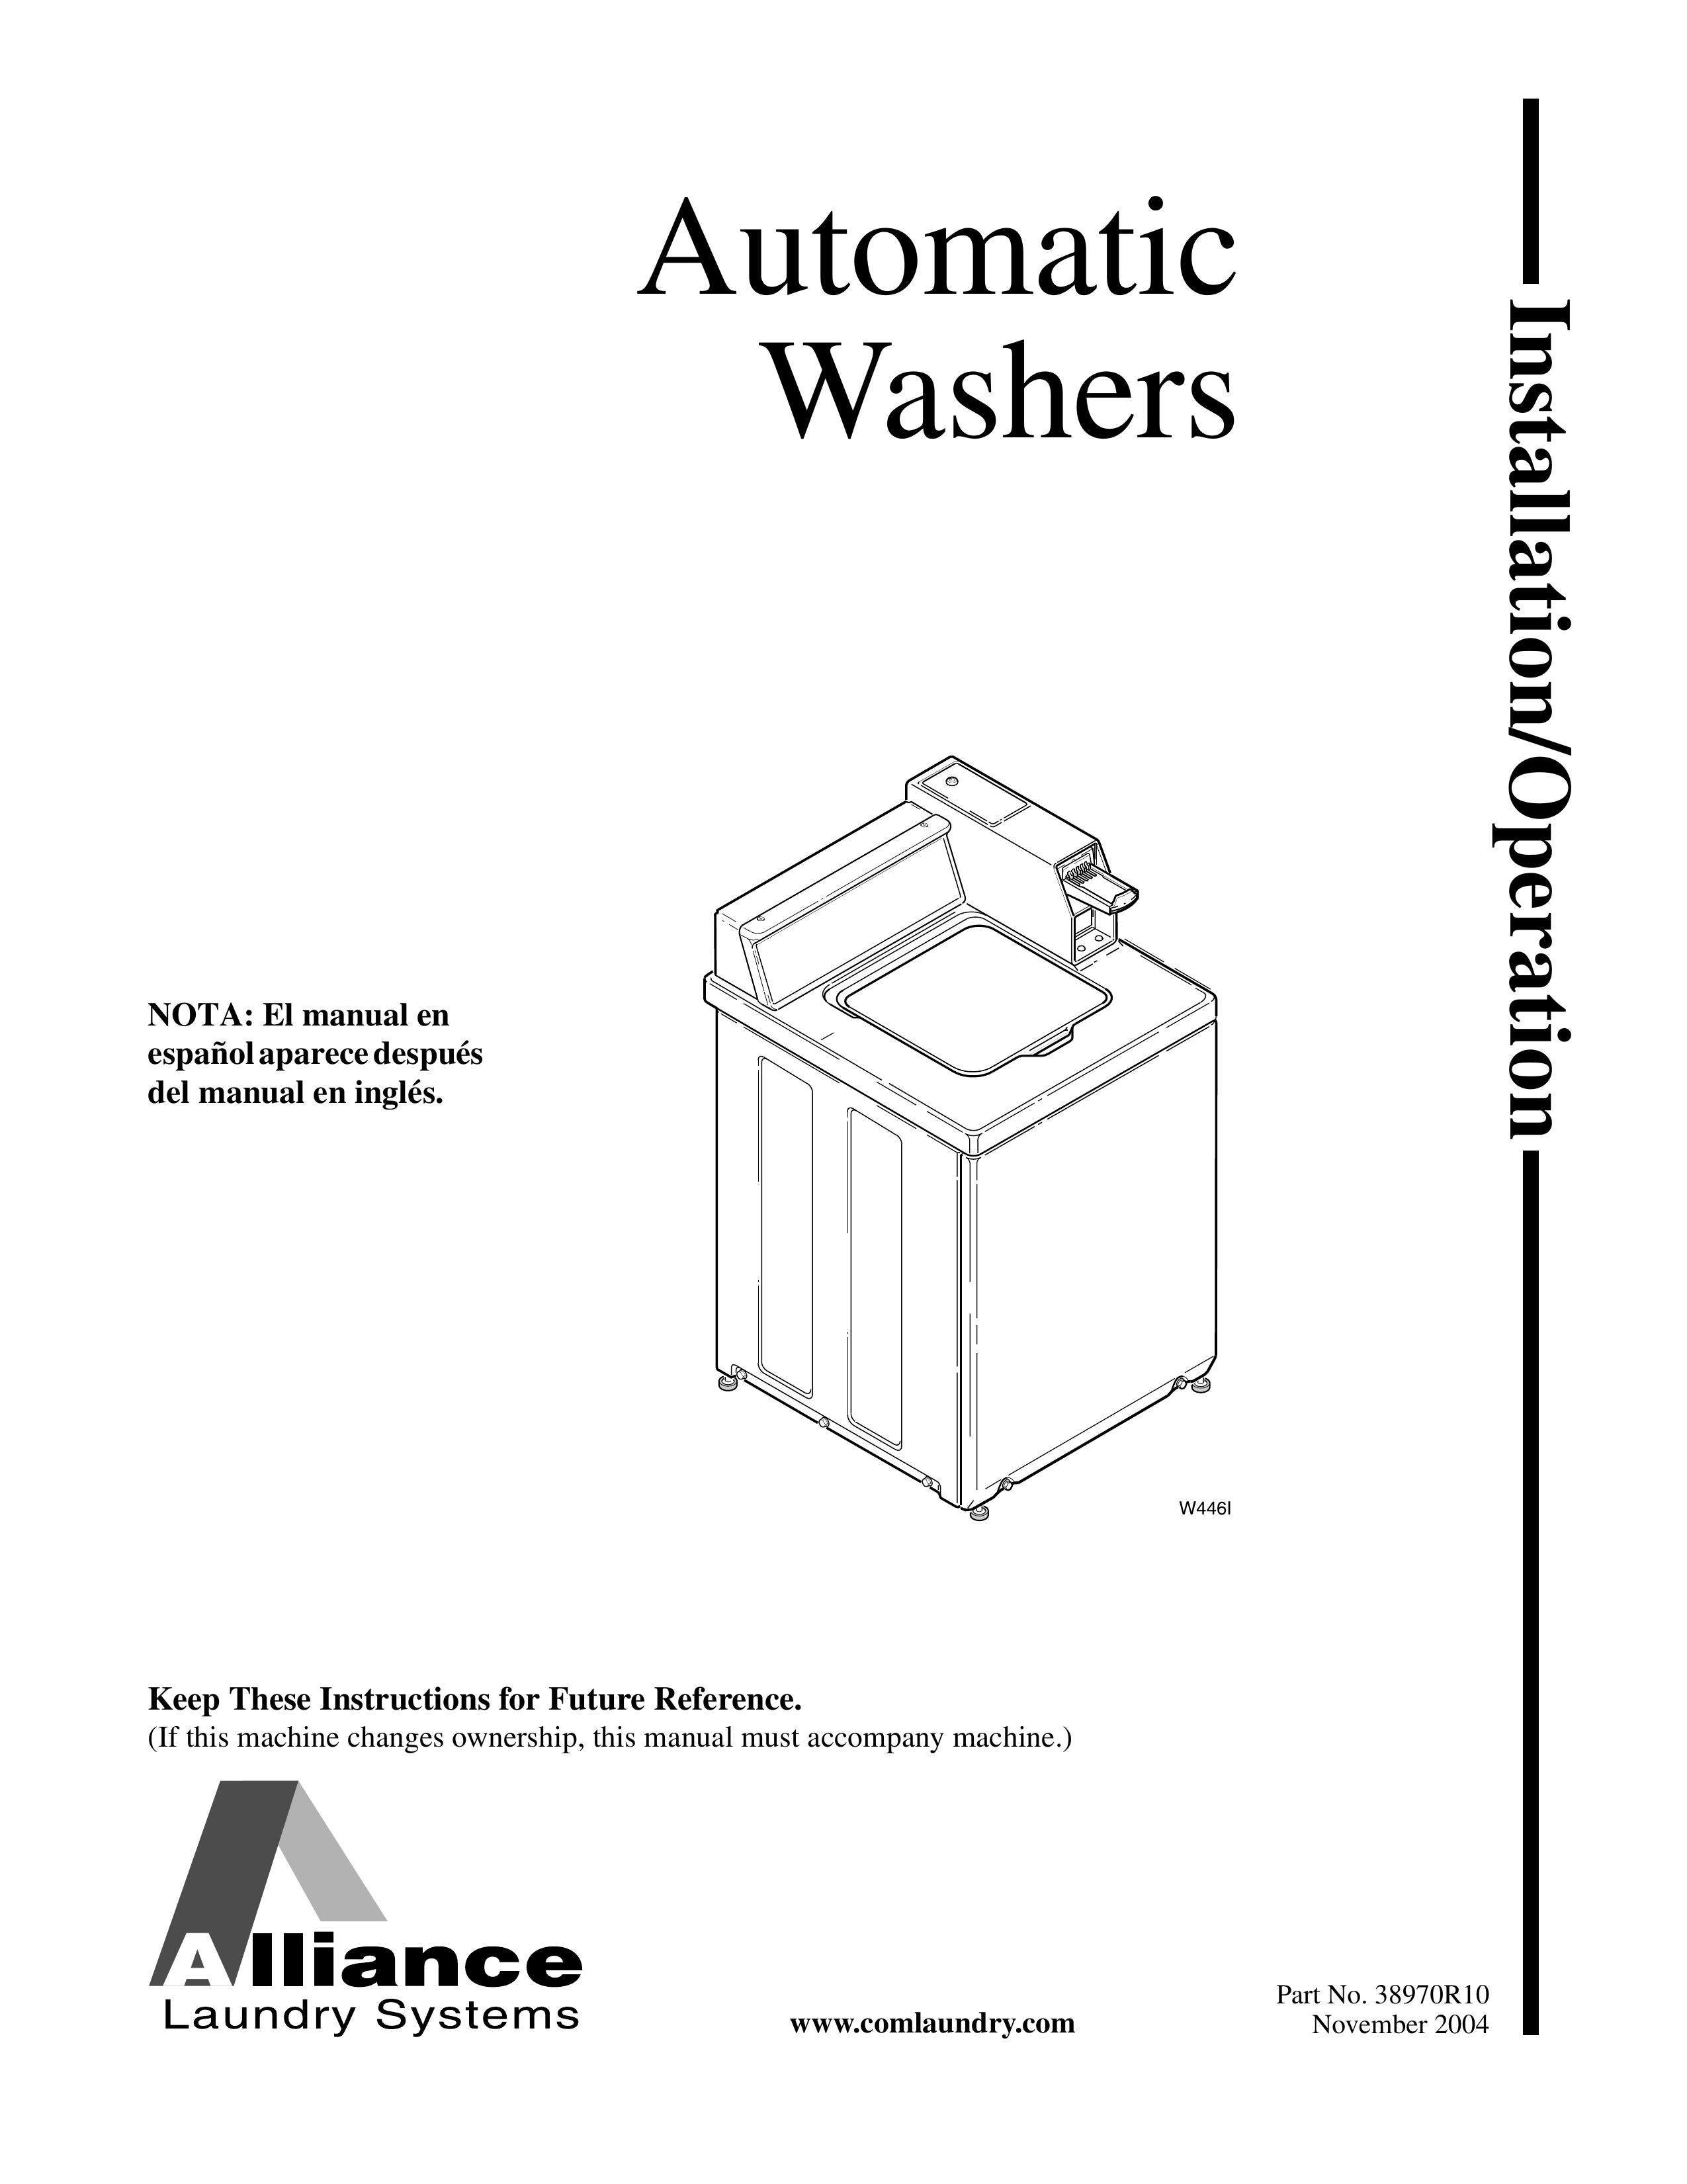 Speed Queen W446I Washer User Manual